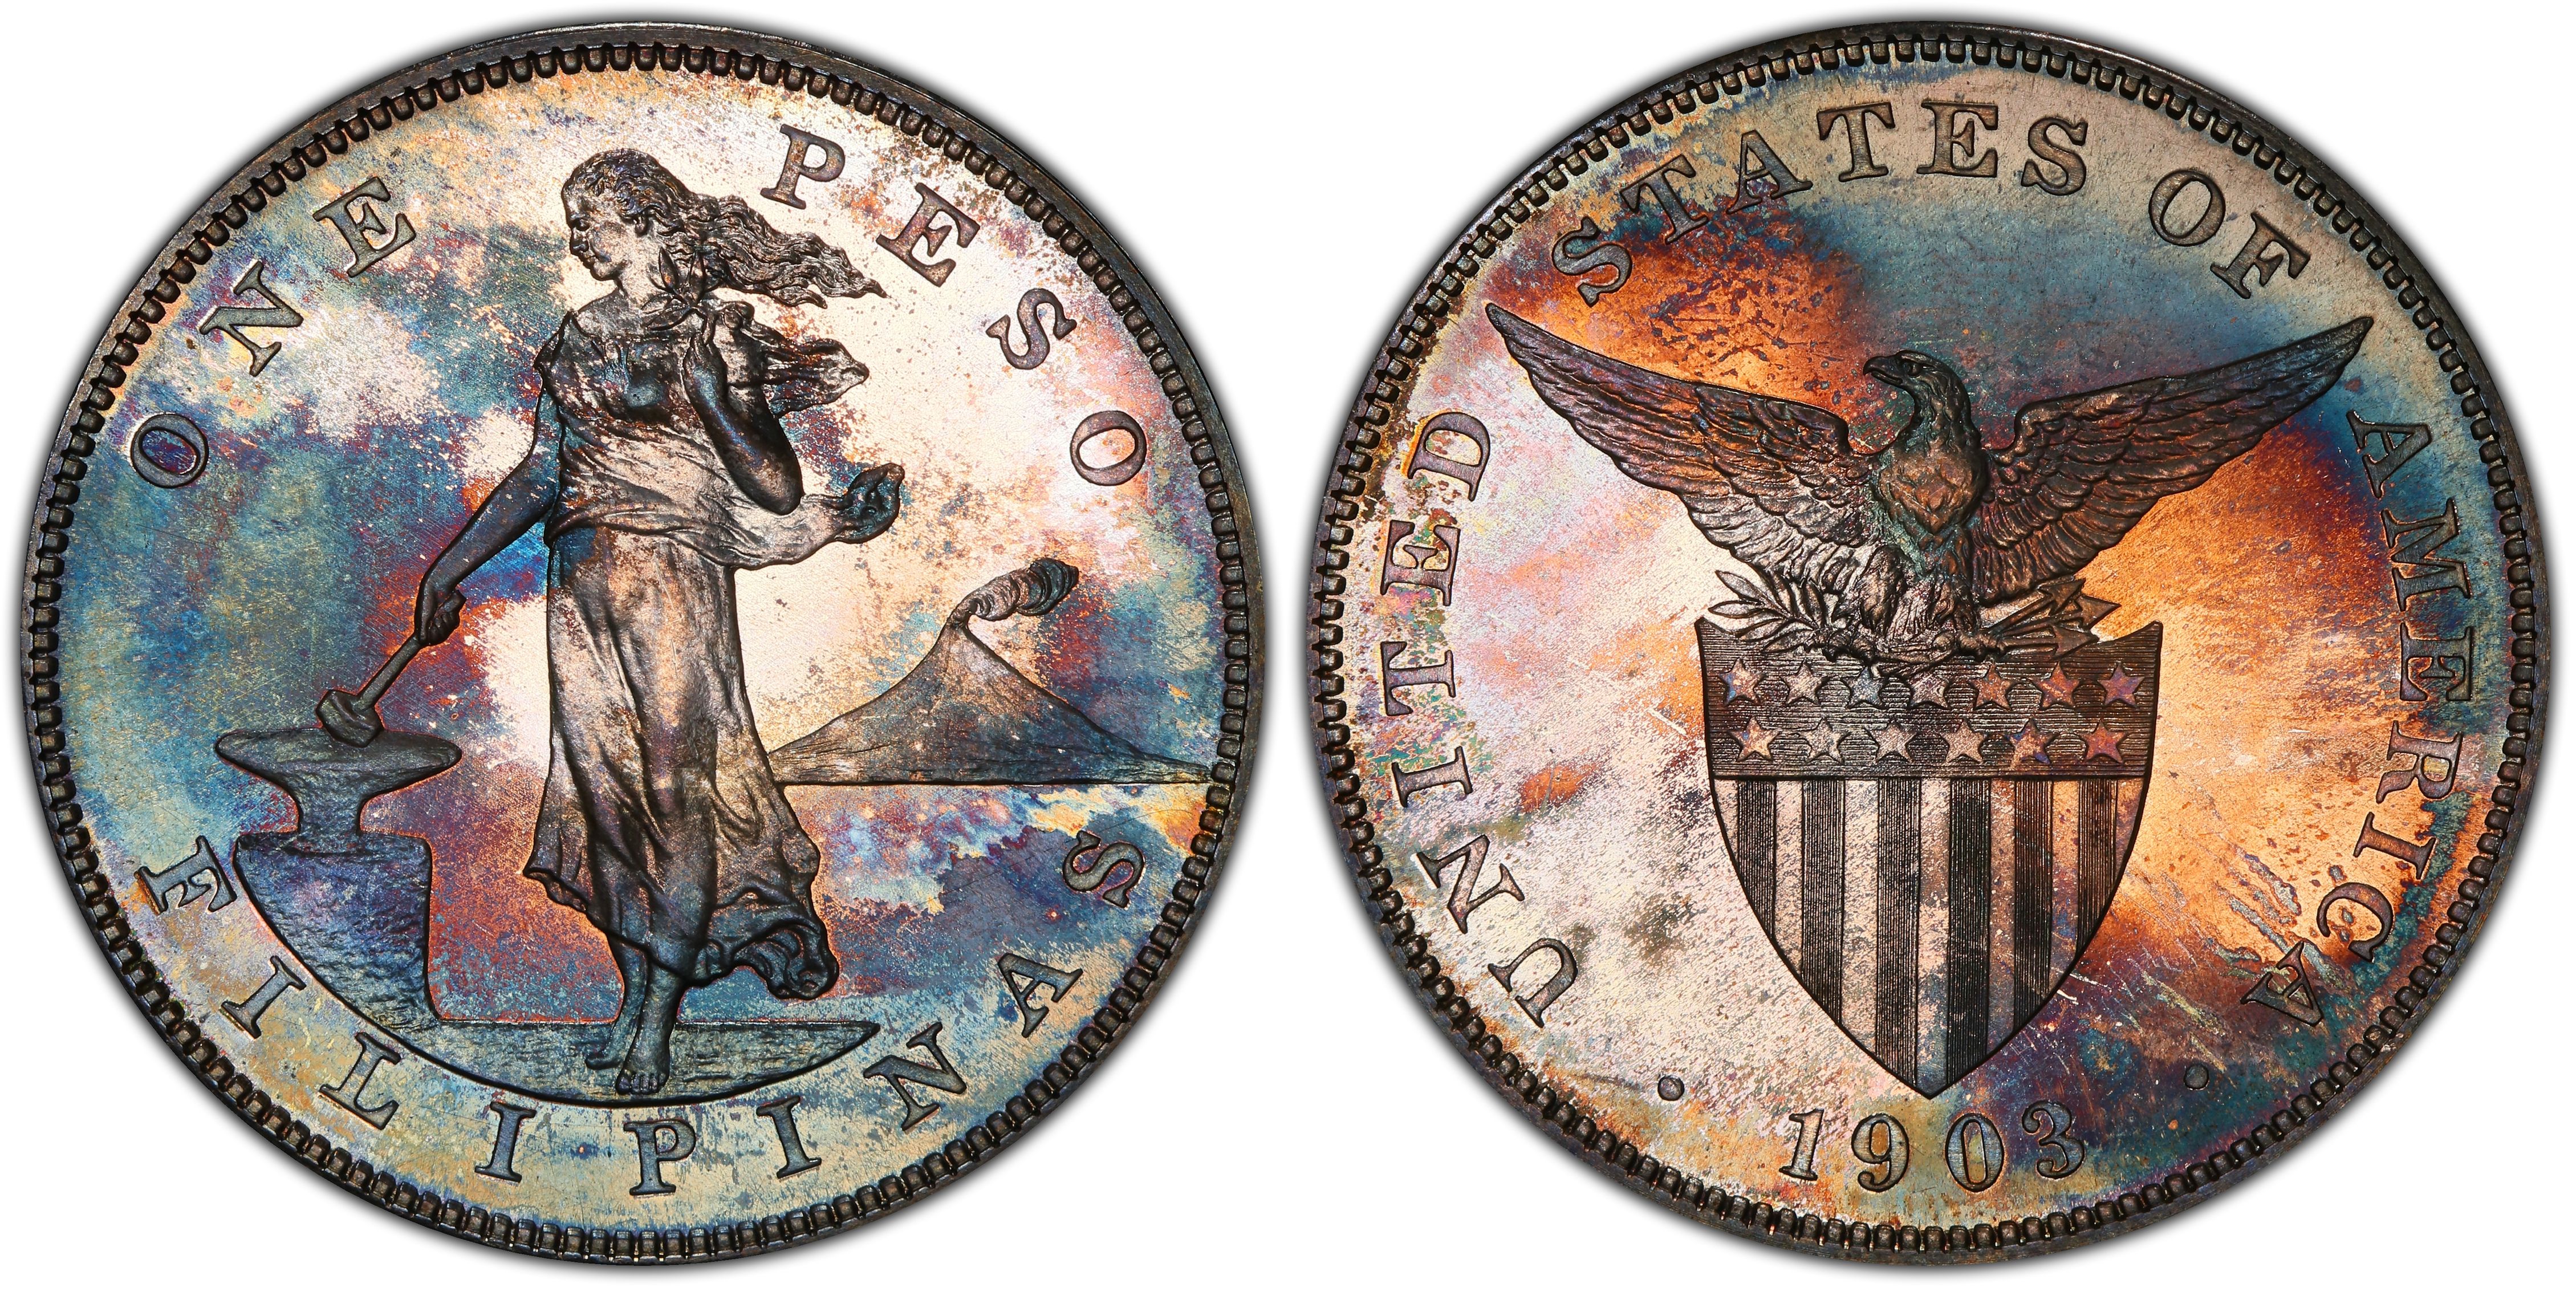 1903 Peso (Proof) U.S. Philippines - PCGS CoinFacts